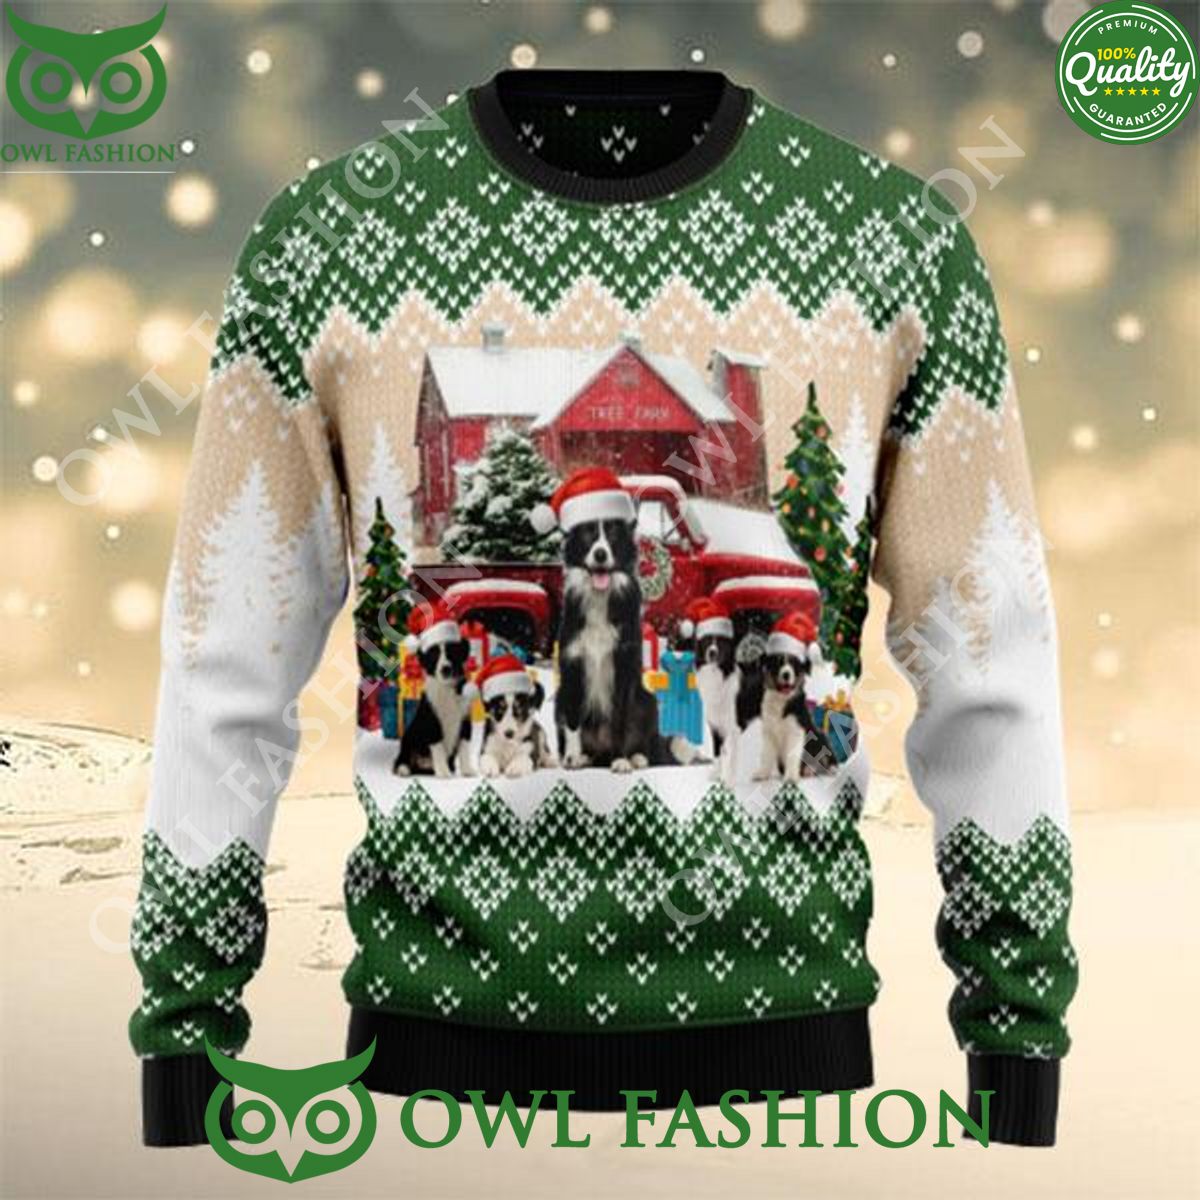 border collie let it snow cute ugly christmas sweater jumper 1 LQ53r.jpg